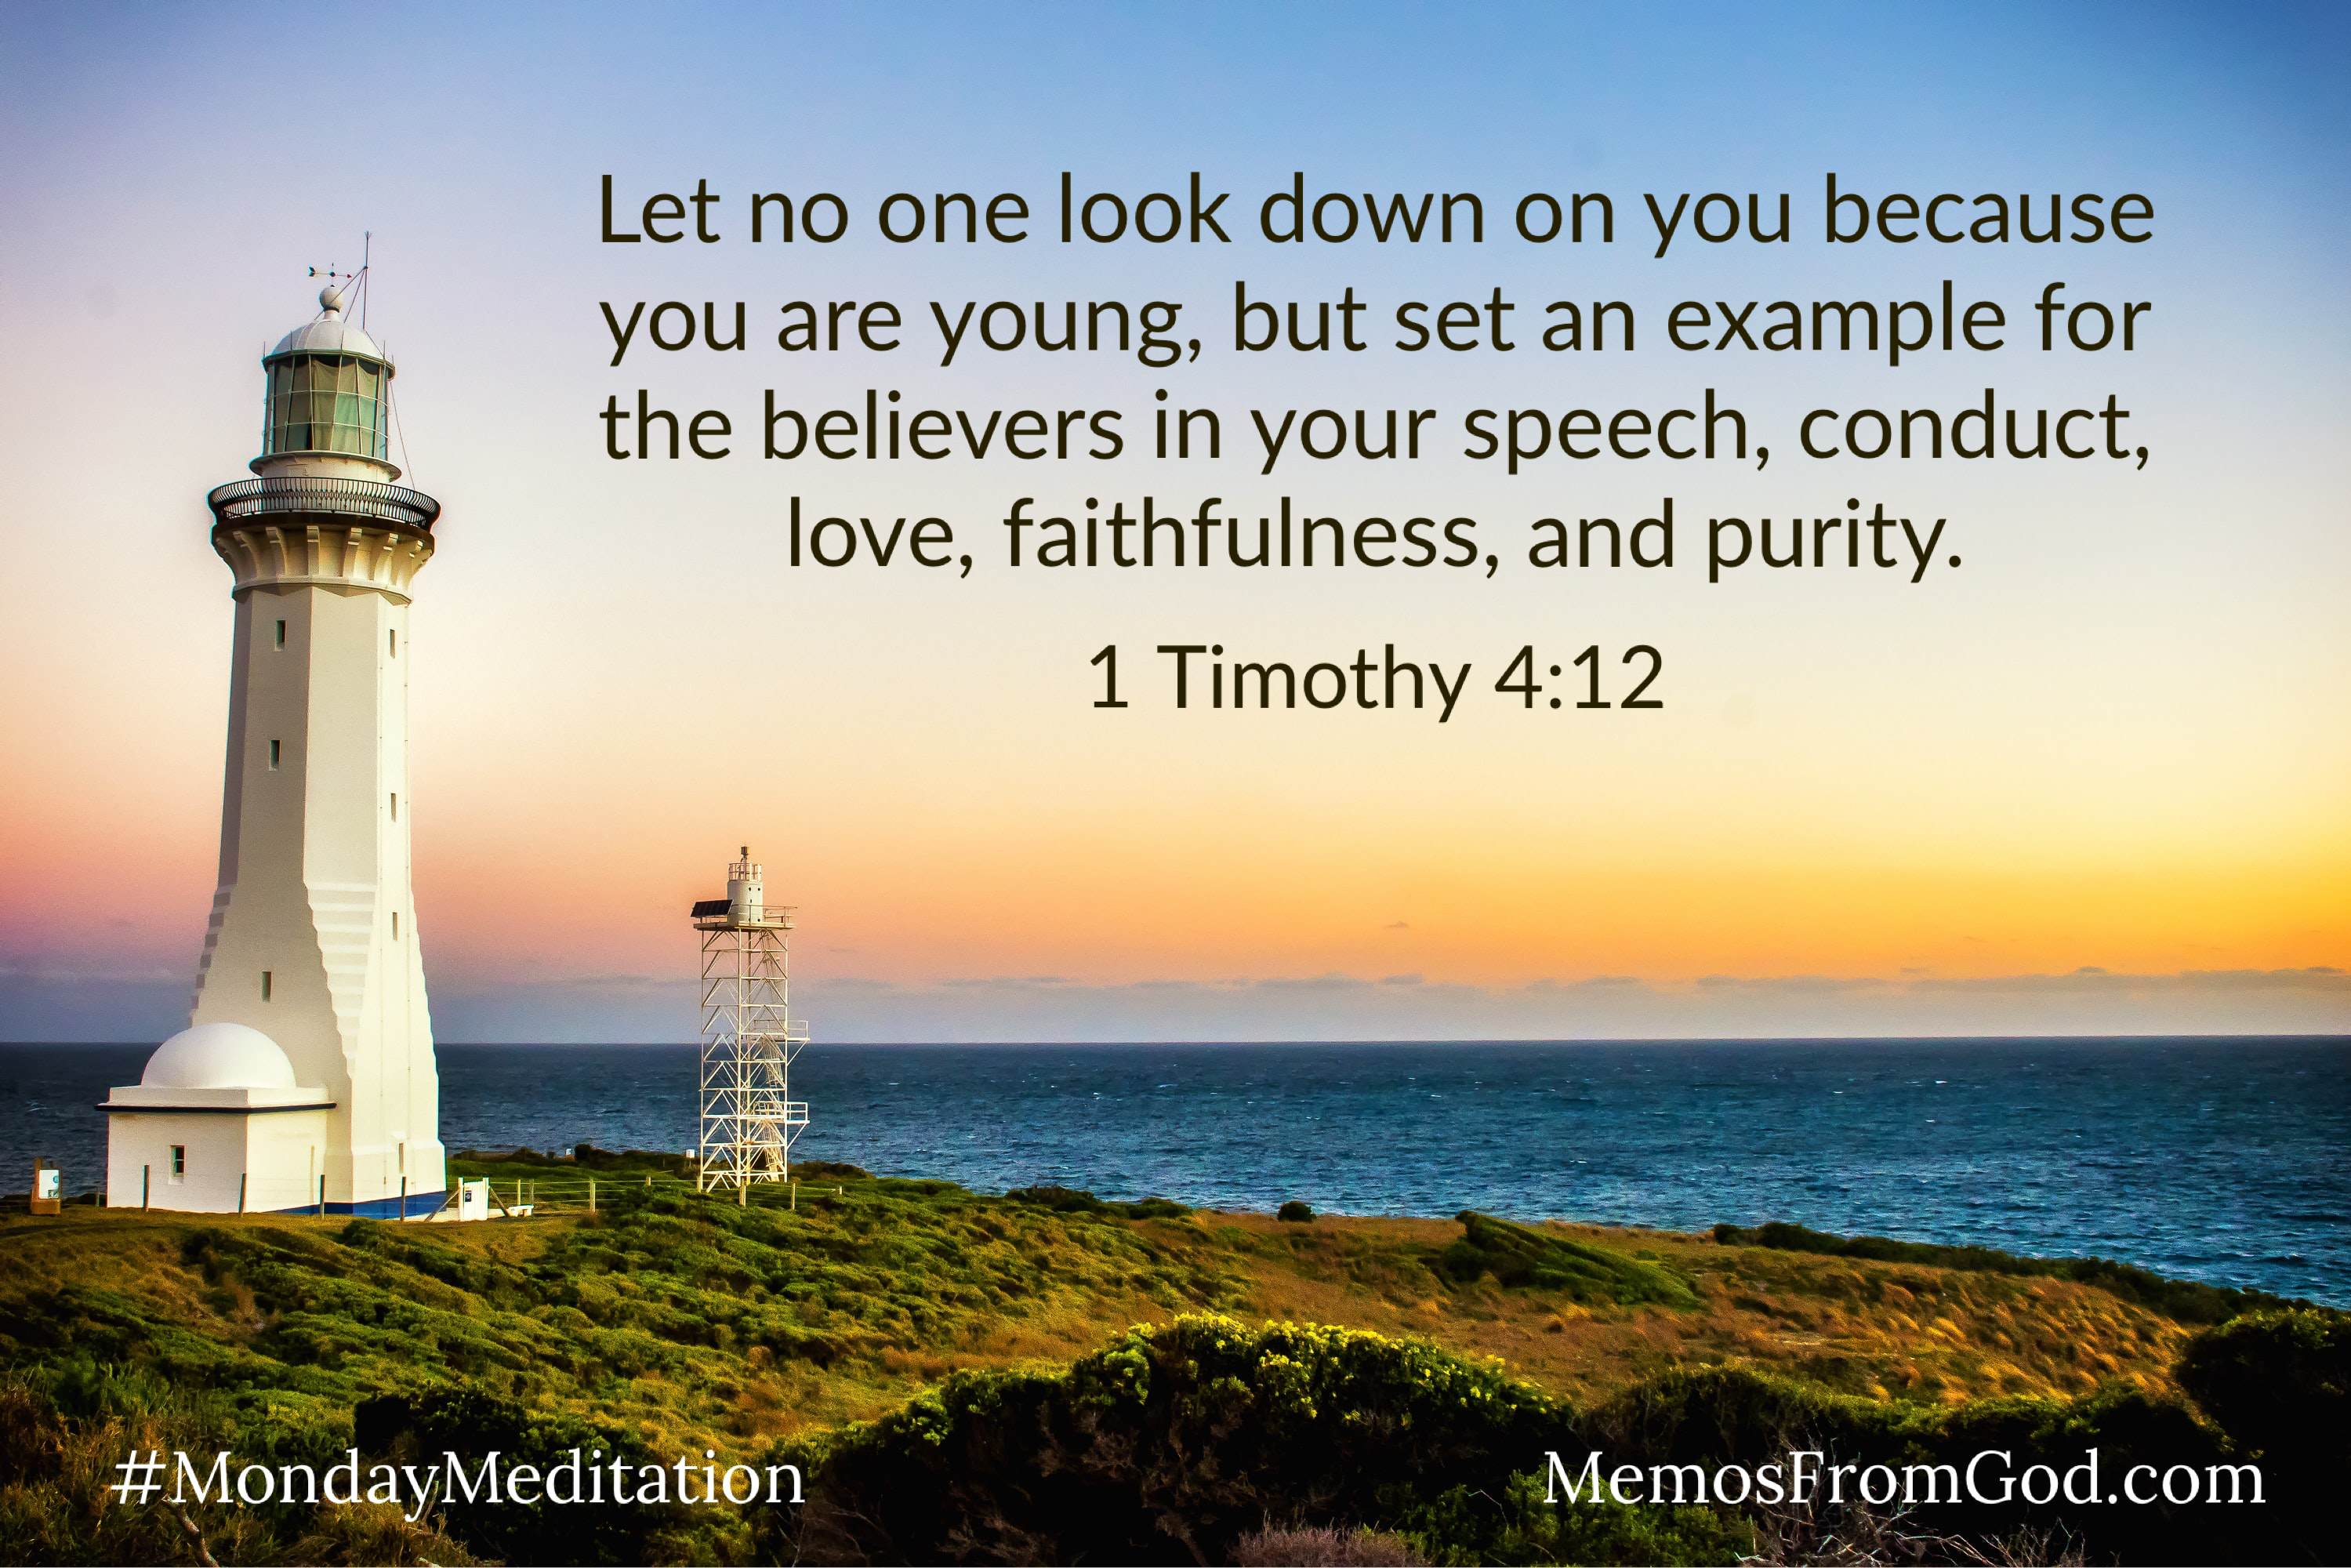 A cream-coloured stucco lighthouse beside a smaller light atop a metal tower. A beautiful golden sunset in a blue and purple sky acts as a backdrop. Caption: Let no one look down on you because you are young, but set an example for the believers in your speech, conduct, love, faithfulness, and purity. 1 Timothy 4:12